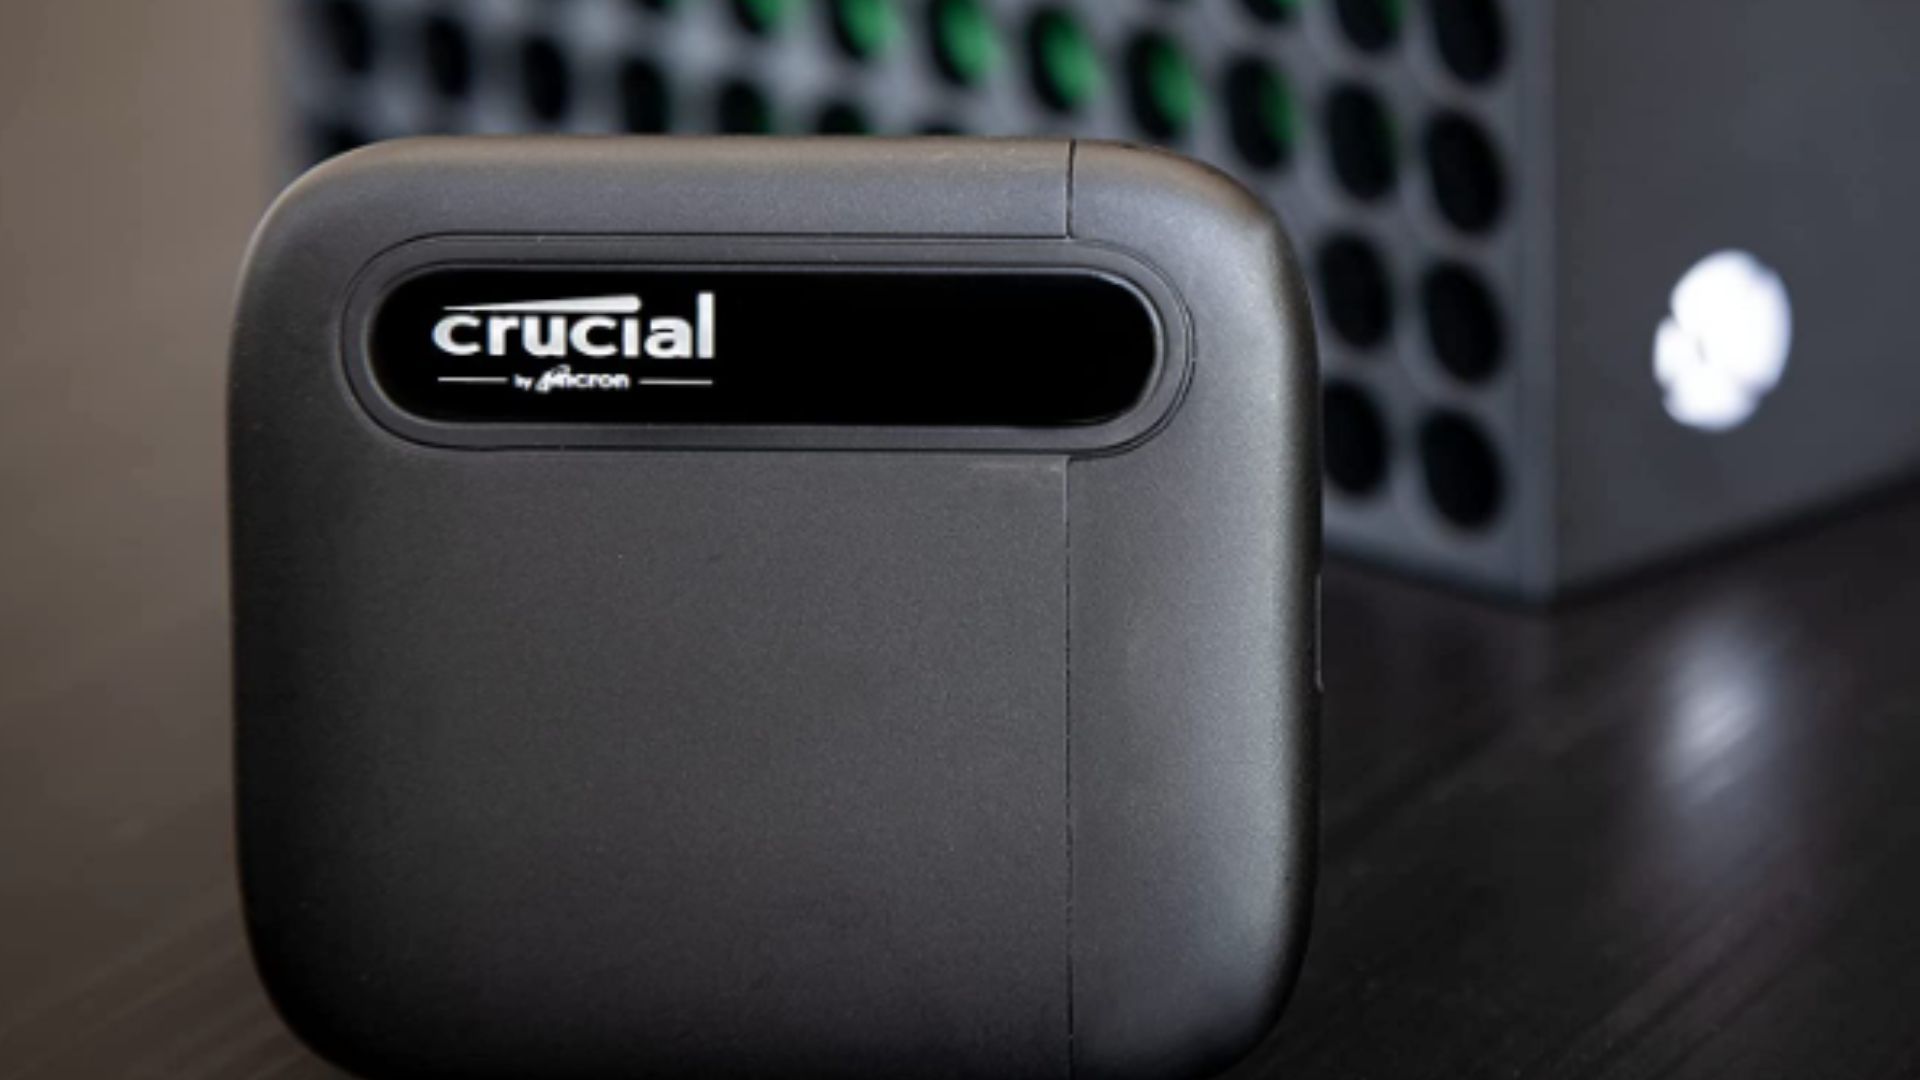 https://images.frandroid.com/wp-content/uploads/2023/03/ssd-crucial-x6-1to-1.jpg